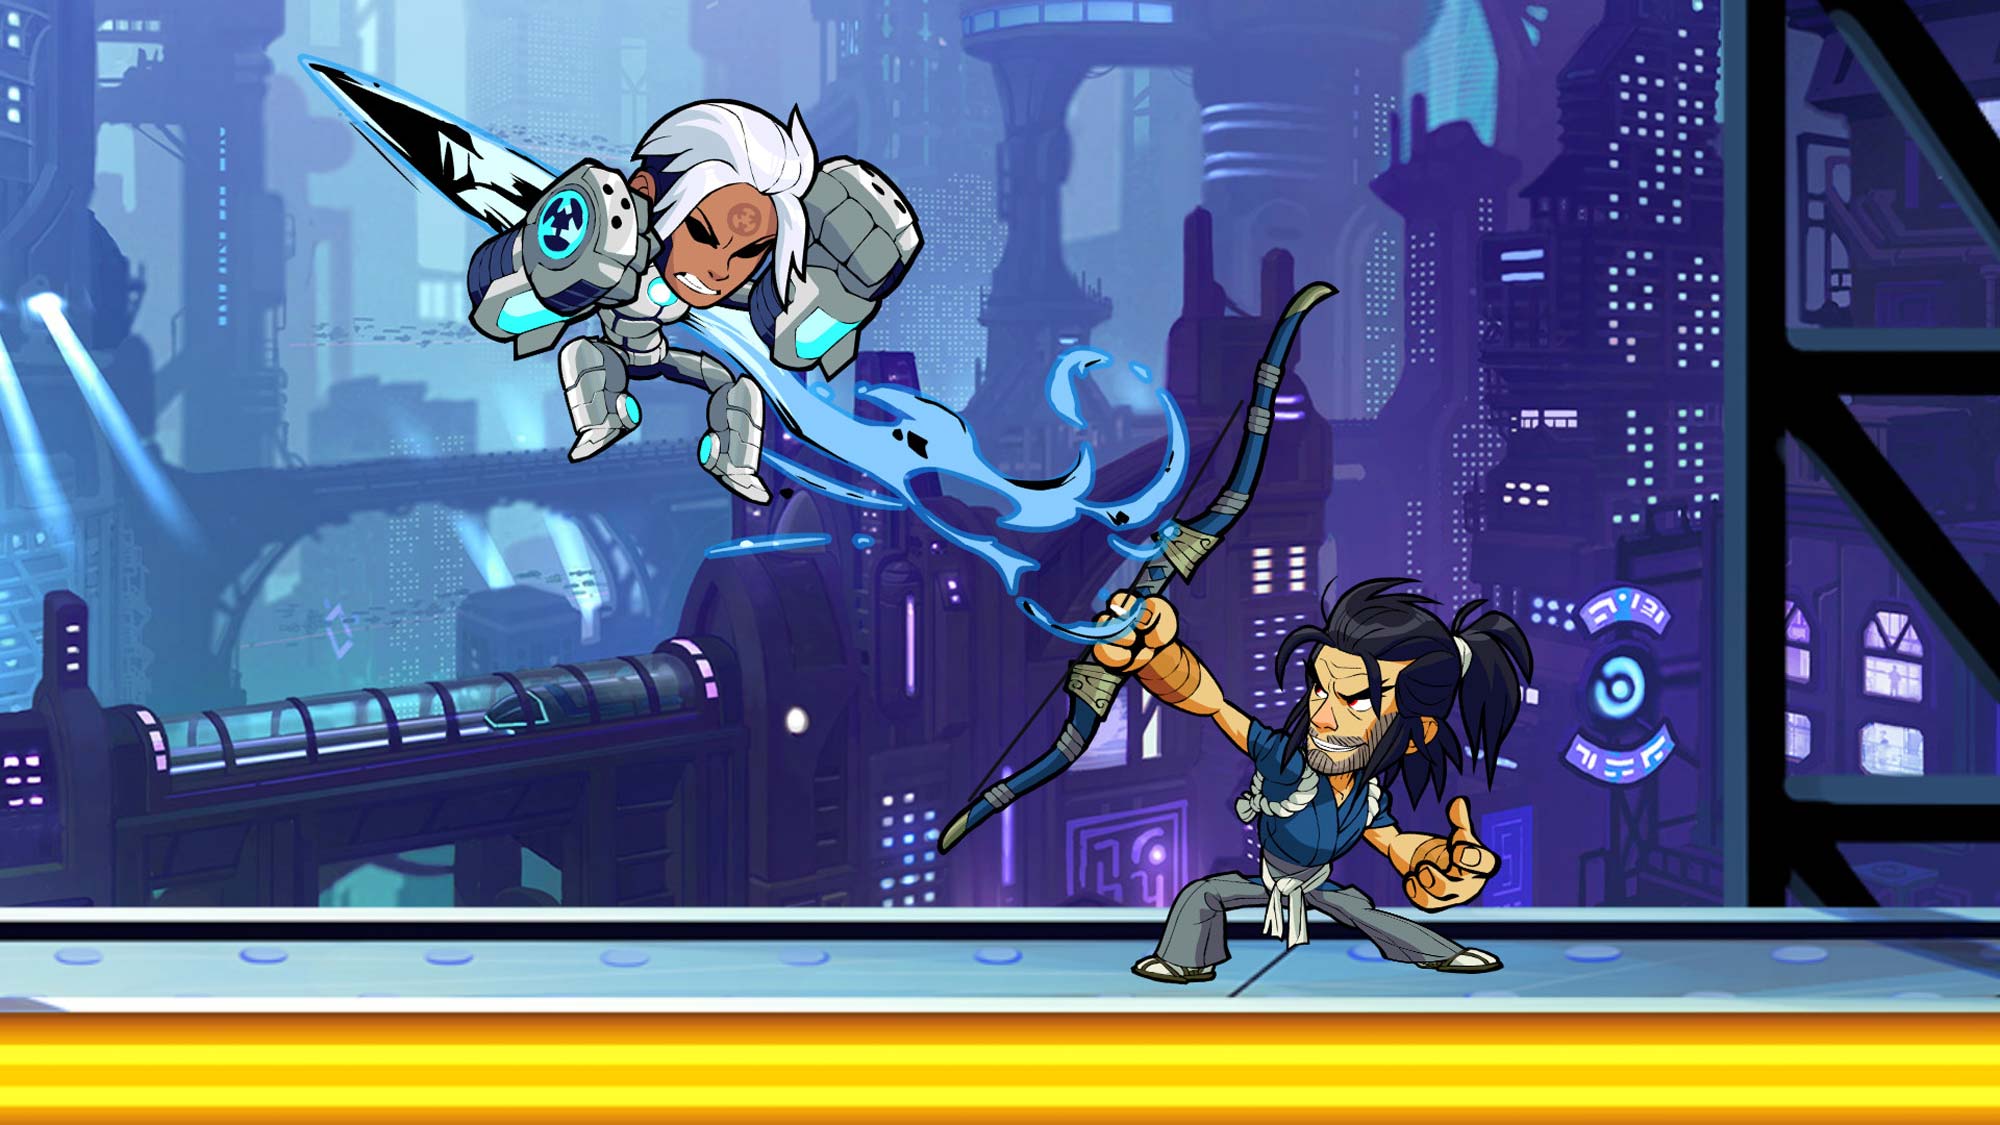 The best free PC games: Brawlhalla